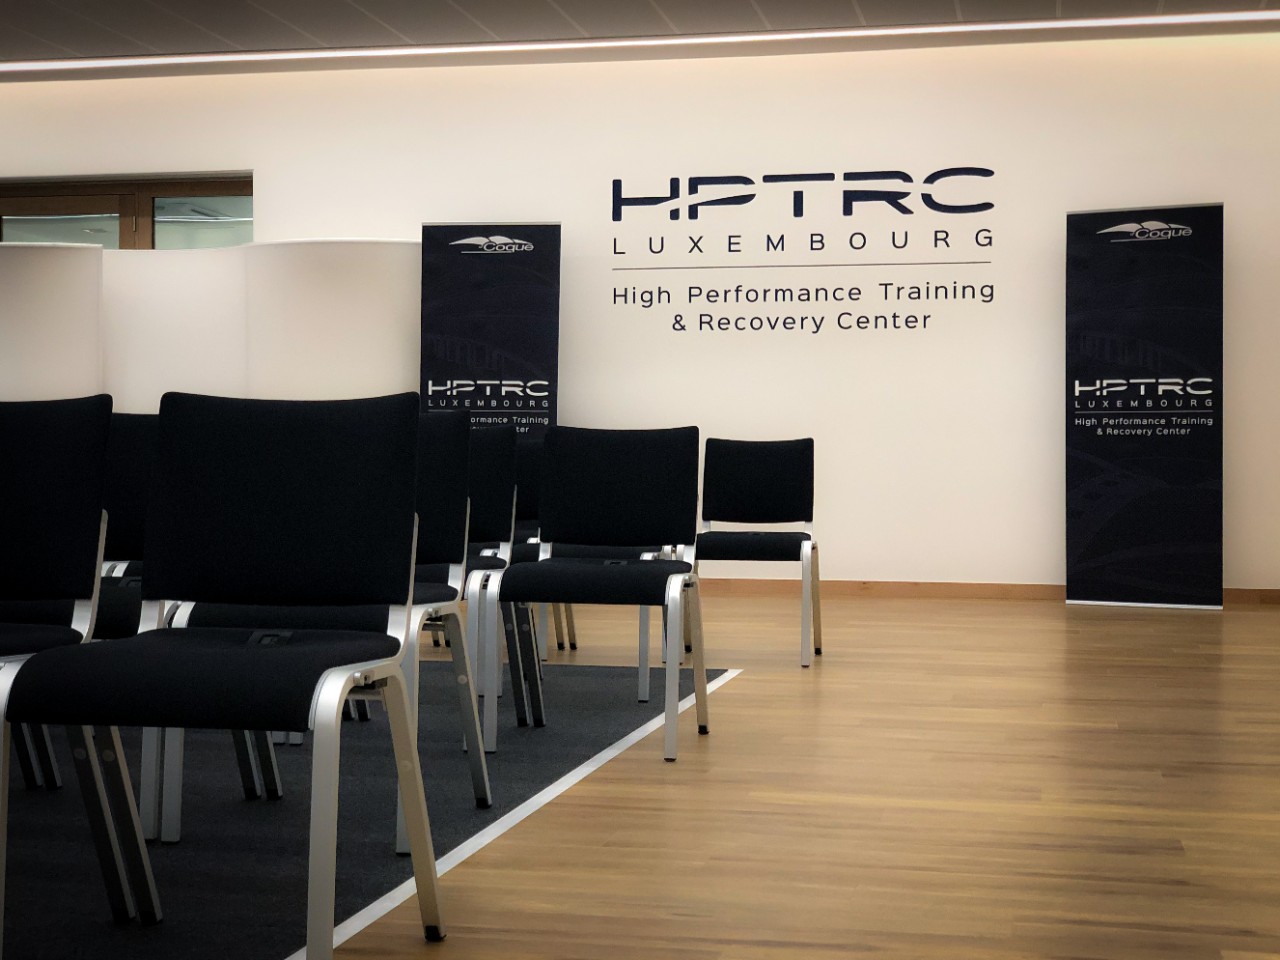 High Performance Training and Recovery Center